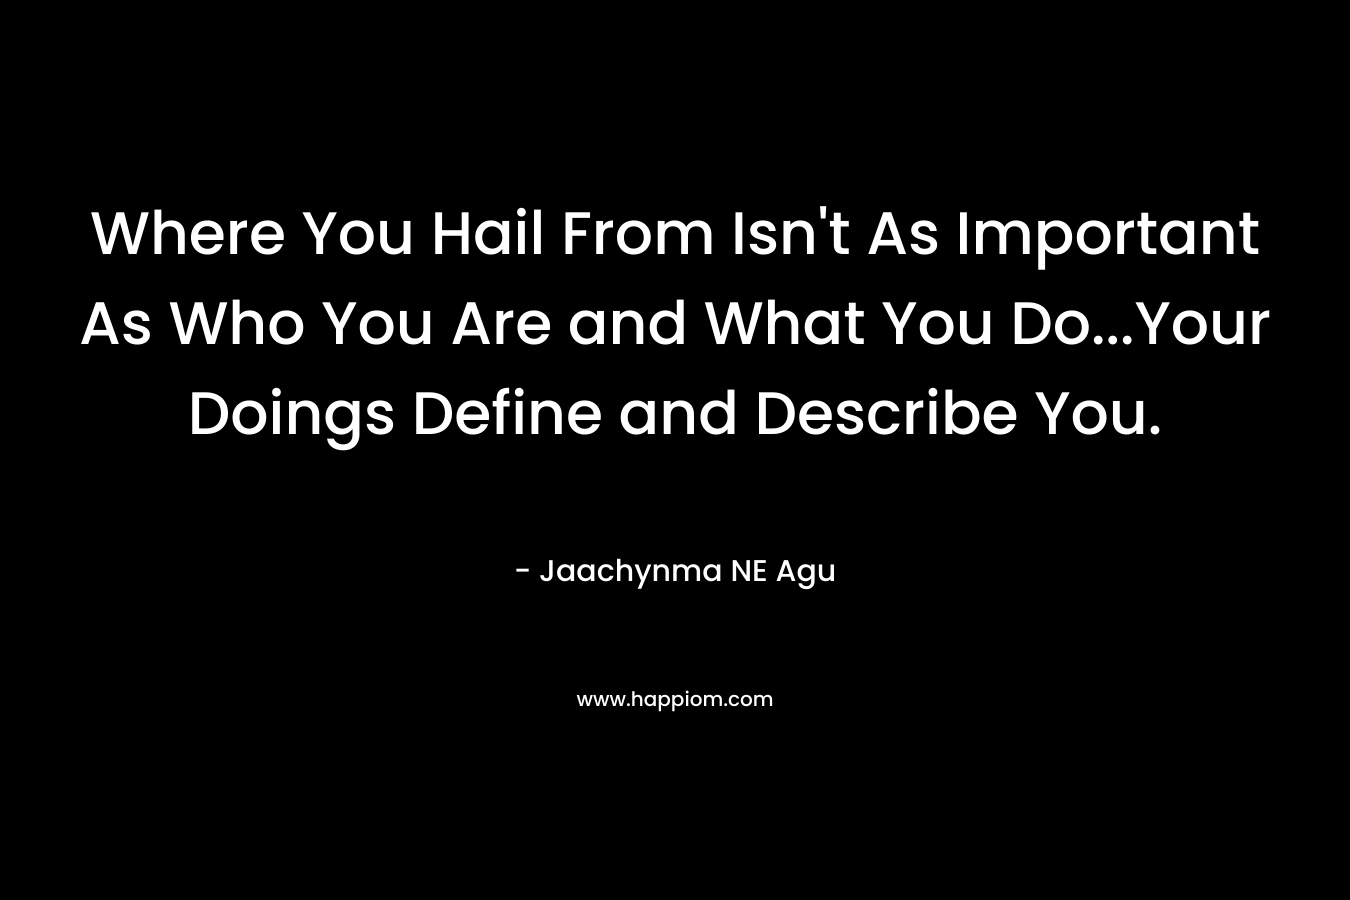 Where You Hail From Isn’t As Important As Who You Are and What You Do…Your Doings Define and Describe You. – Jaachynma NE Agu